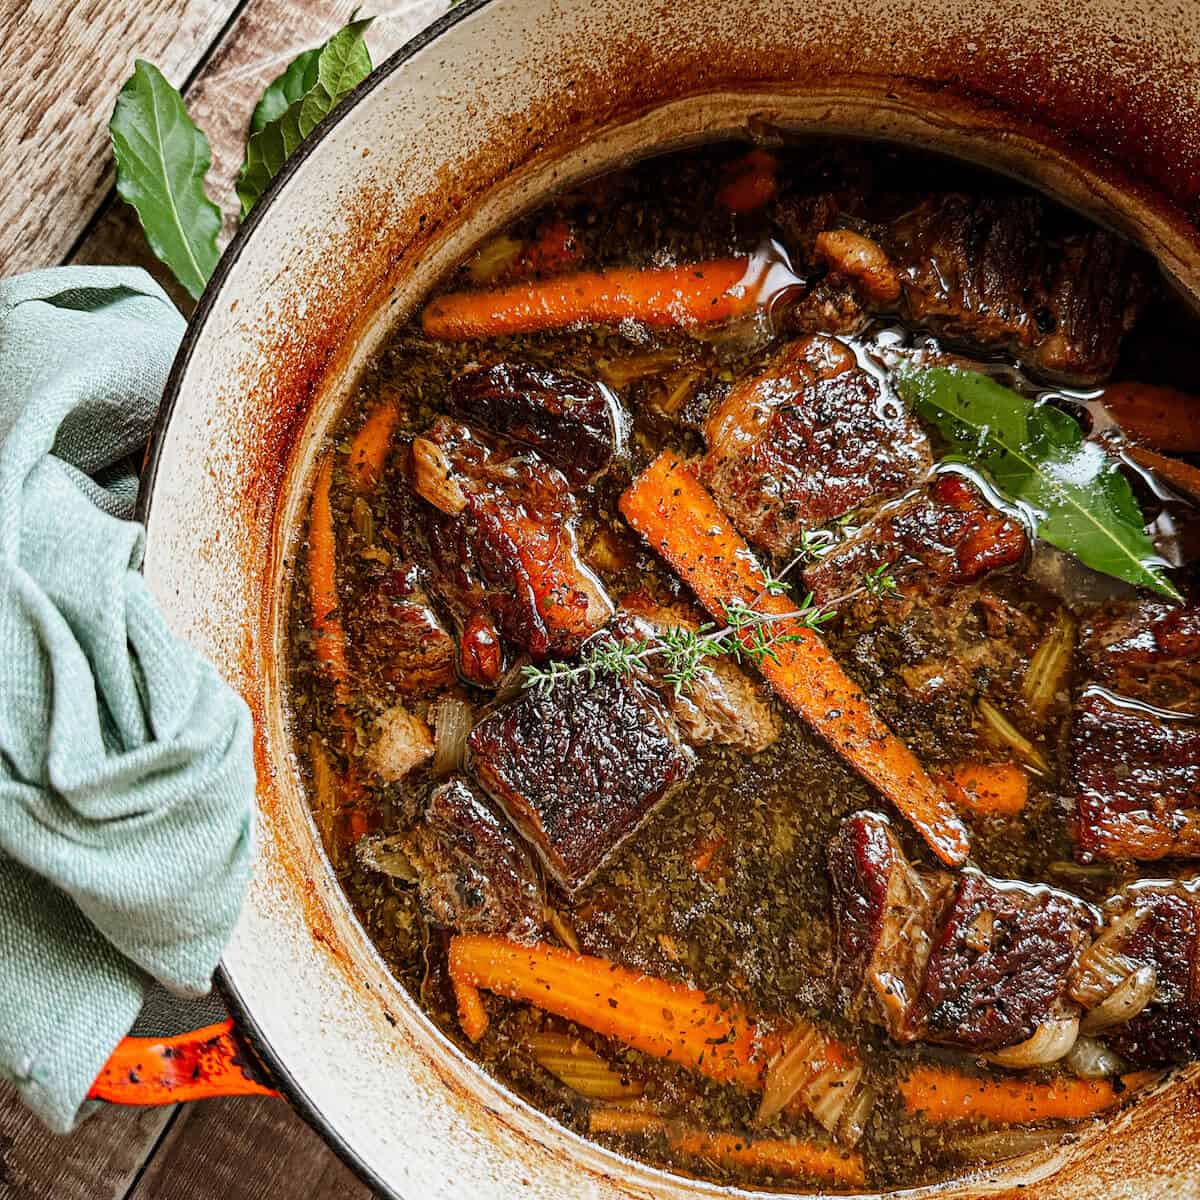 A Dutch Oven Filled With Slow Cooked Beef Short Ribs Braised In Beer. 